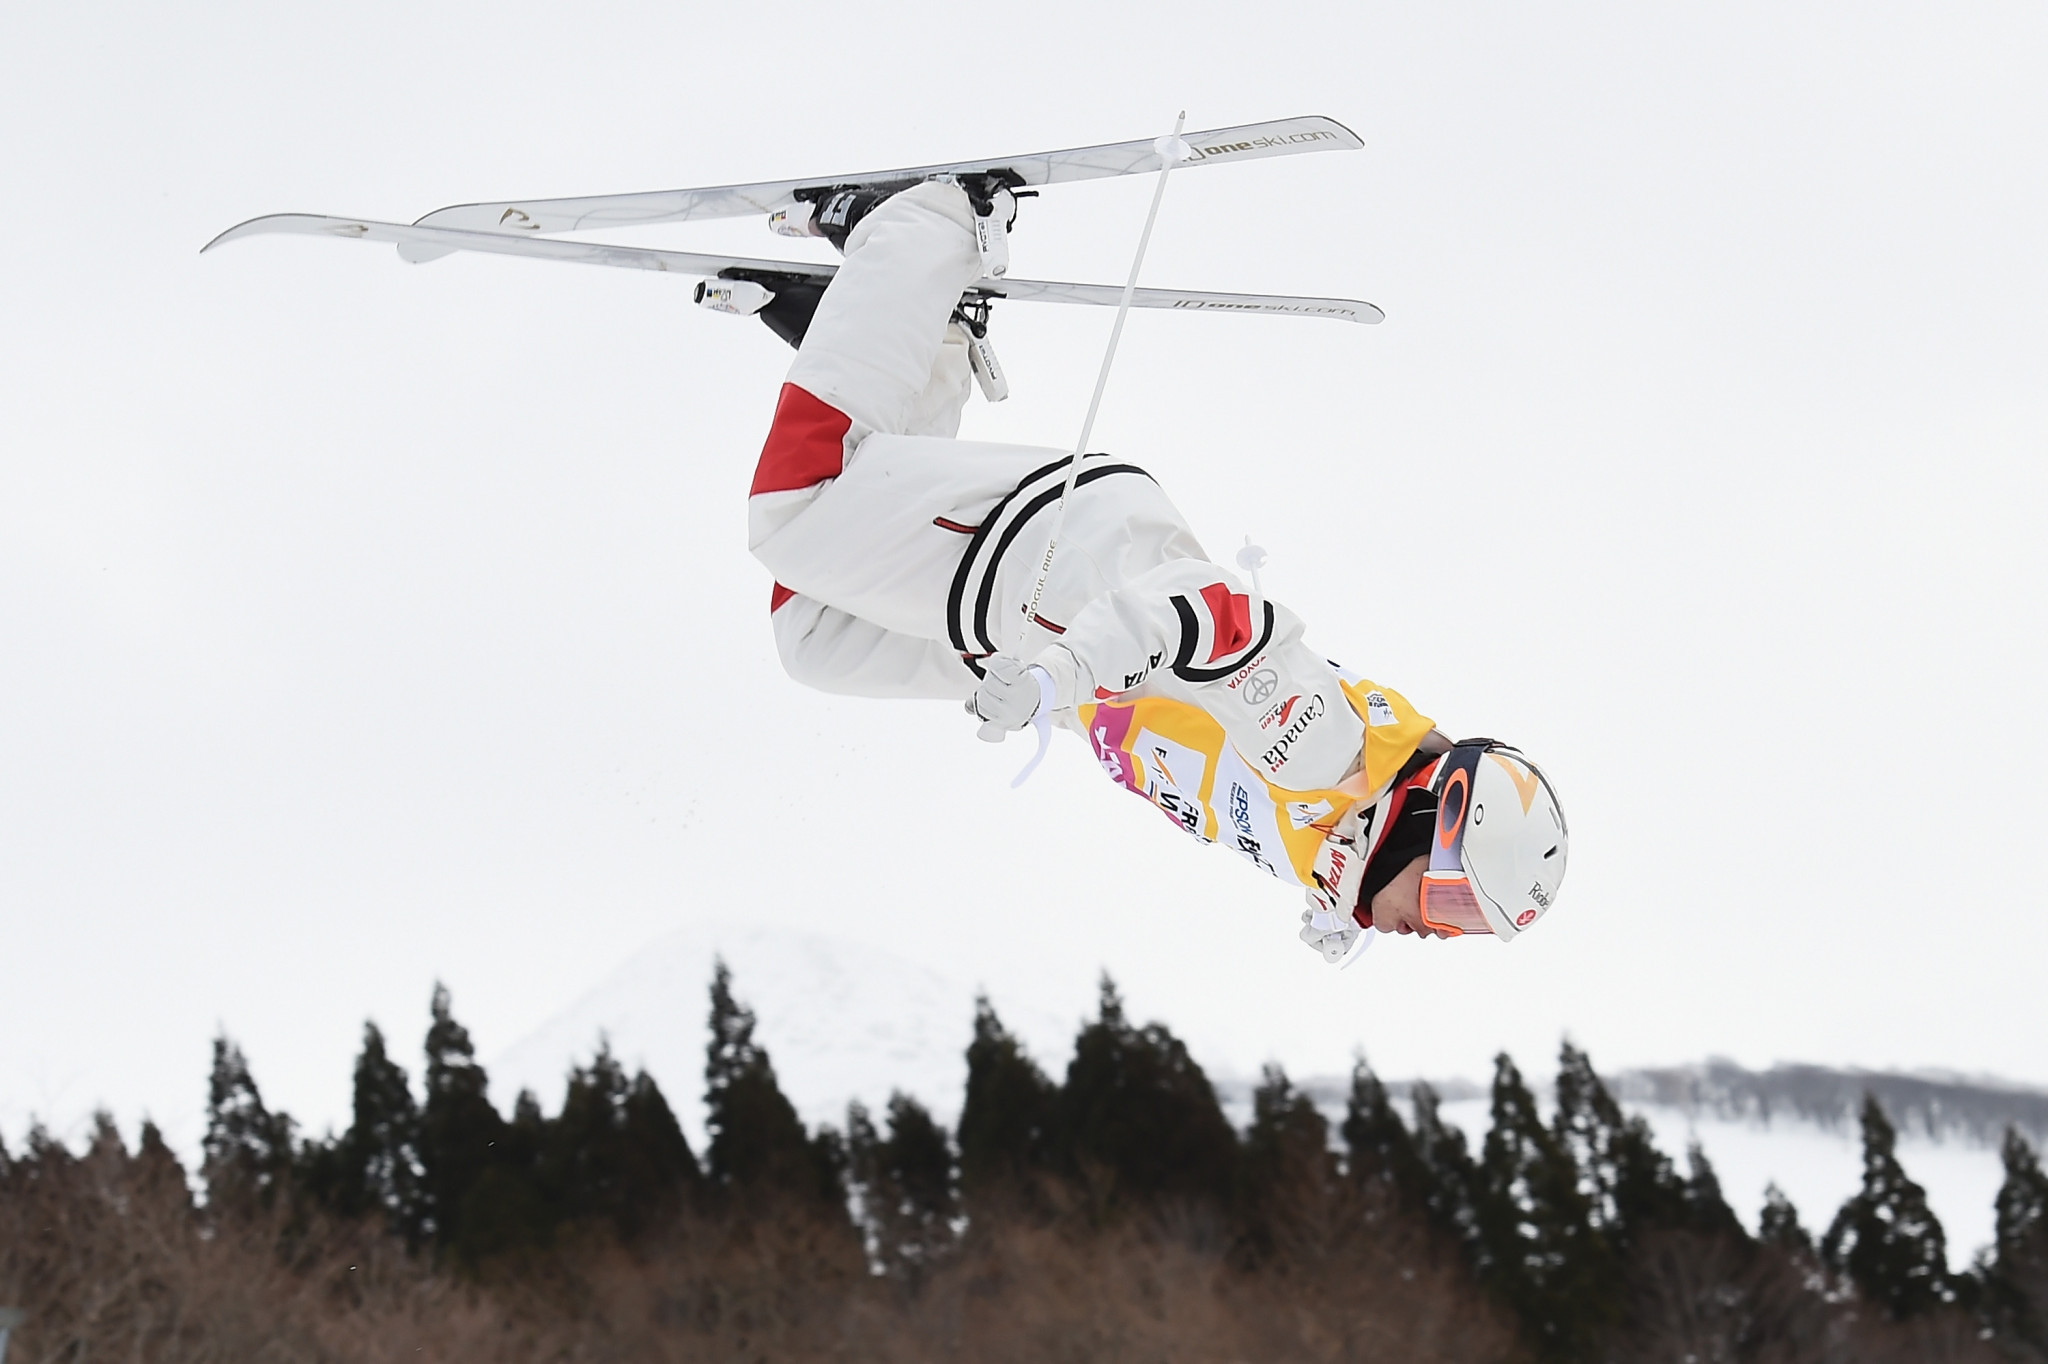 Canada's Mikaël Kingsbury will be hoping to continue his good start to the season at the FIS Freestyle Skiing World Cup event in Thaiwoo ©Getty Images